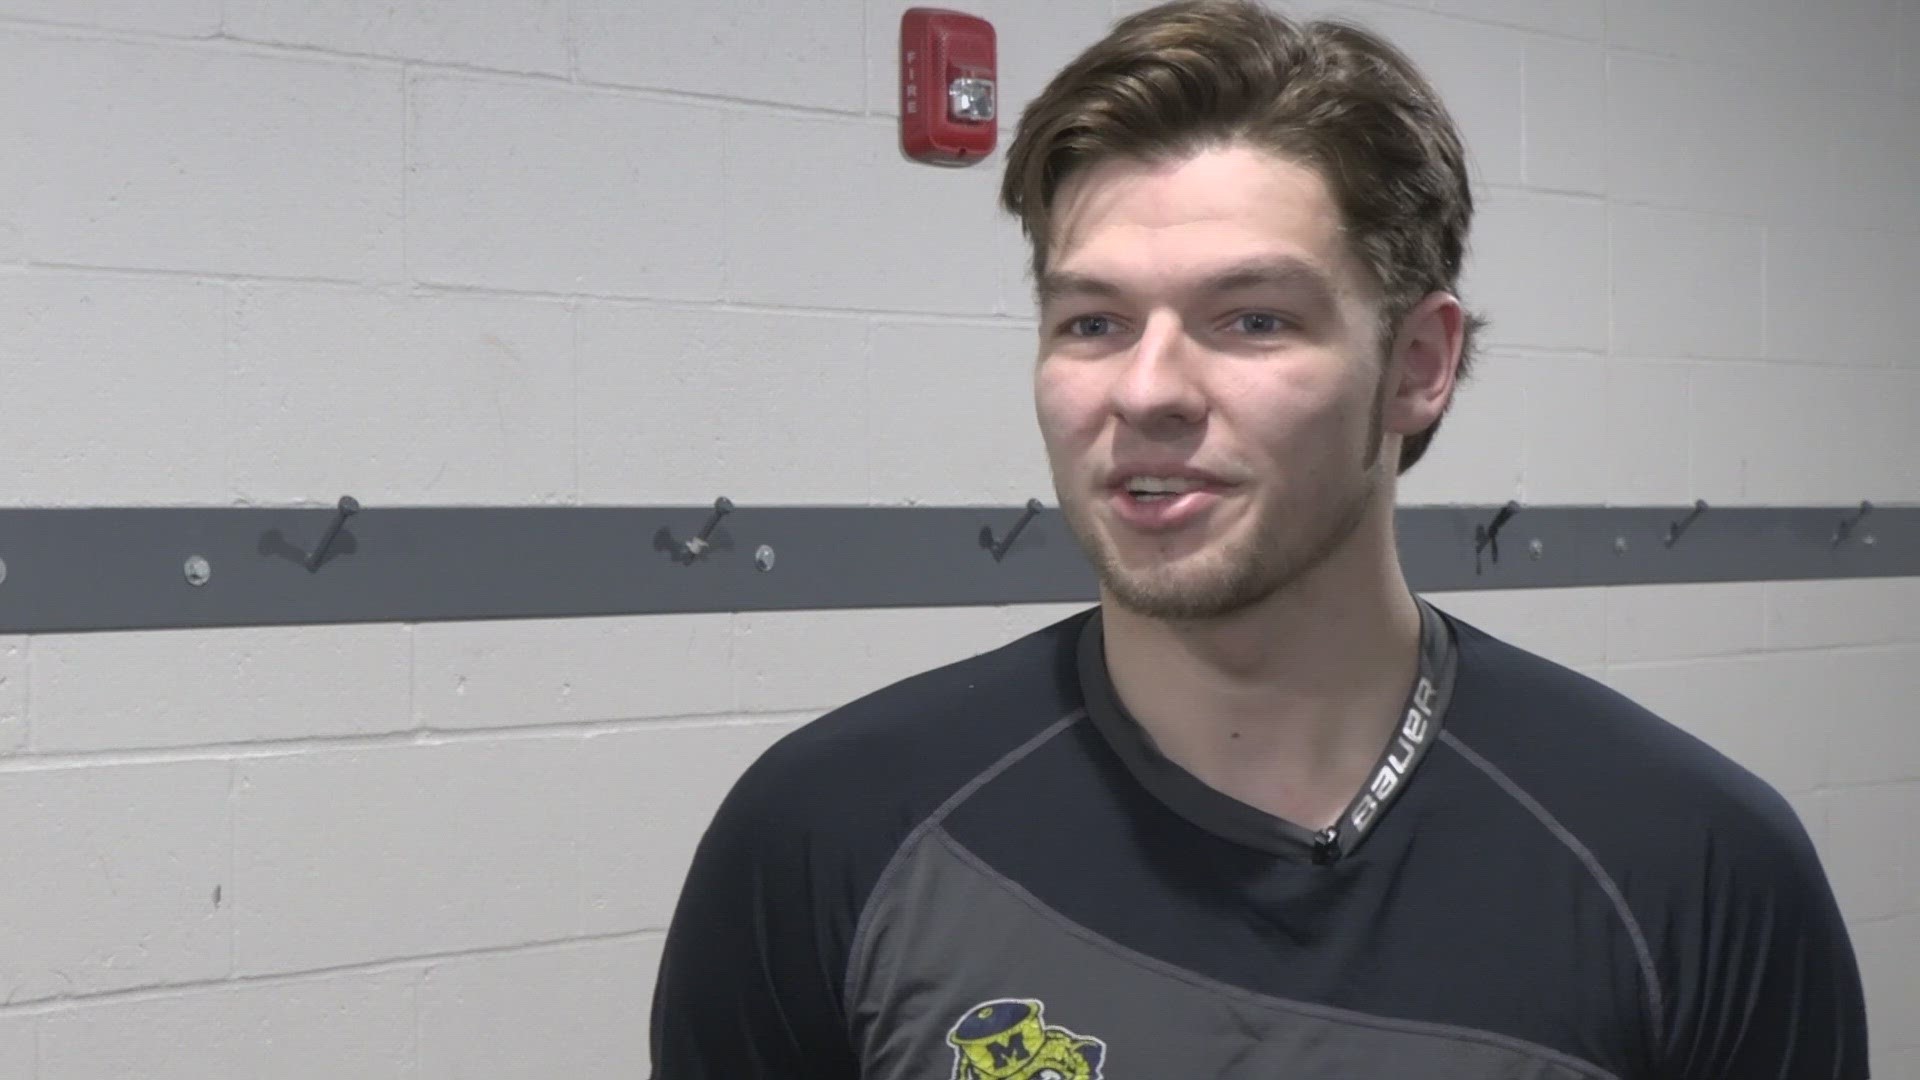 It will be a homecoming weekend for Michigan goaltender Jake Barczewski. He leads his Wolverines into his hometown with a Frozen Four spot on the line.